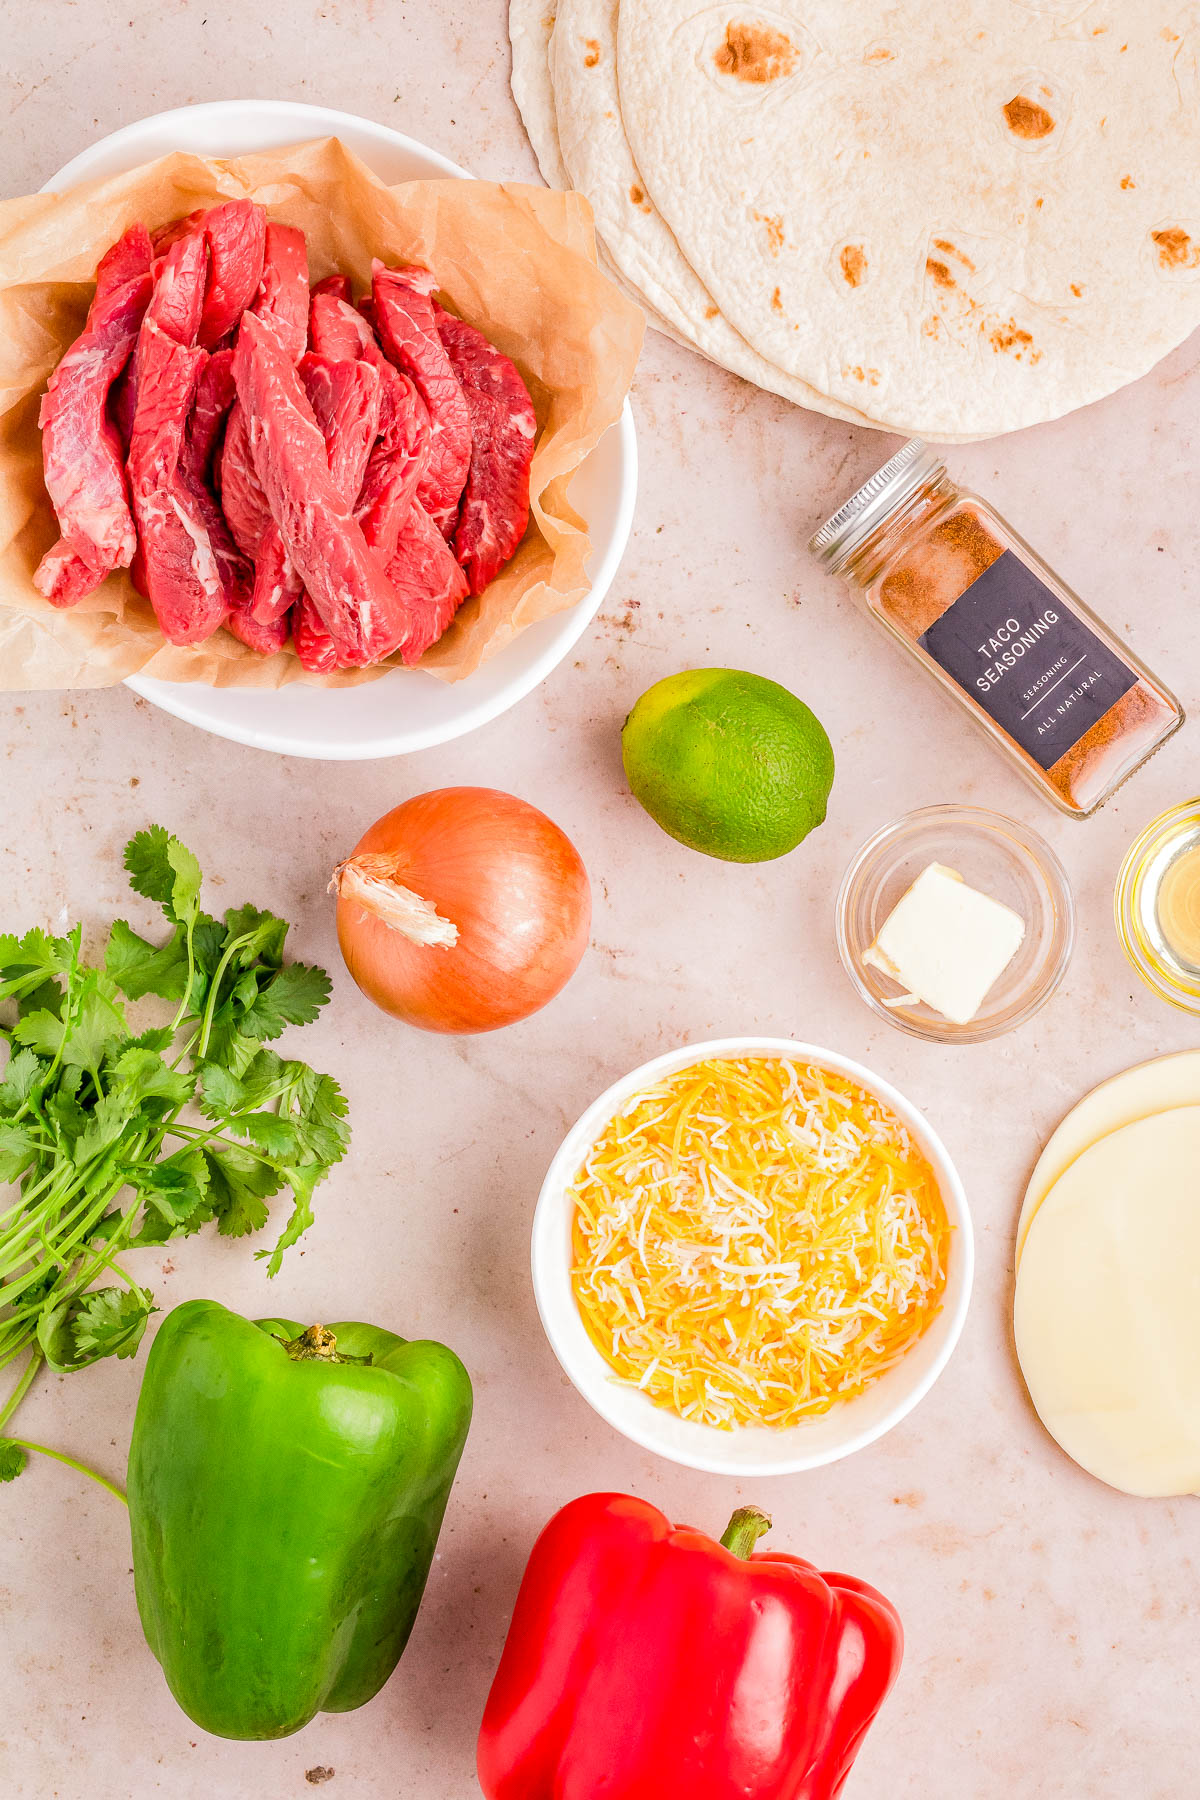 Ingredients for cooking displayed on a table, including raw beef strips, tortillas, cheese, lime, bell peppers, onion, cilantro, and spices.